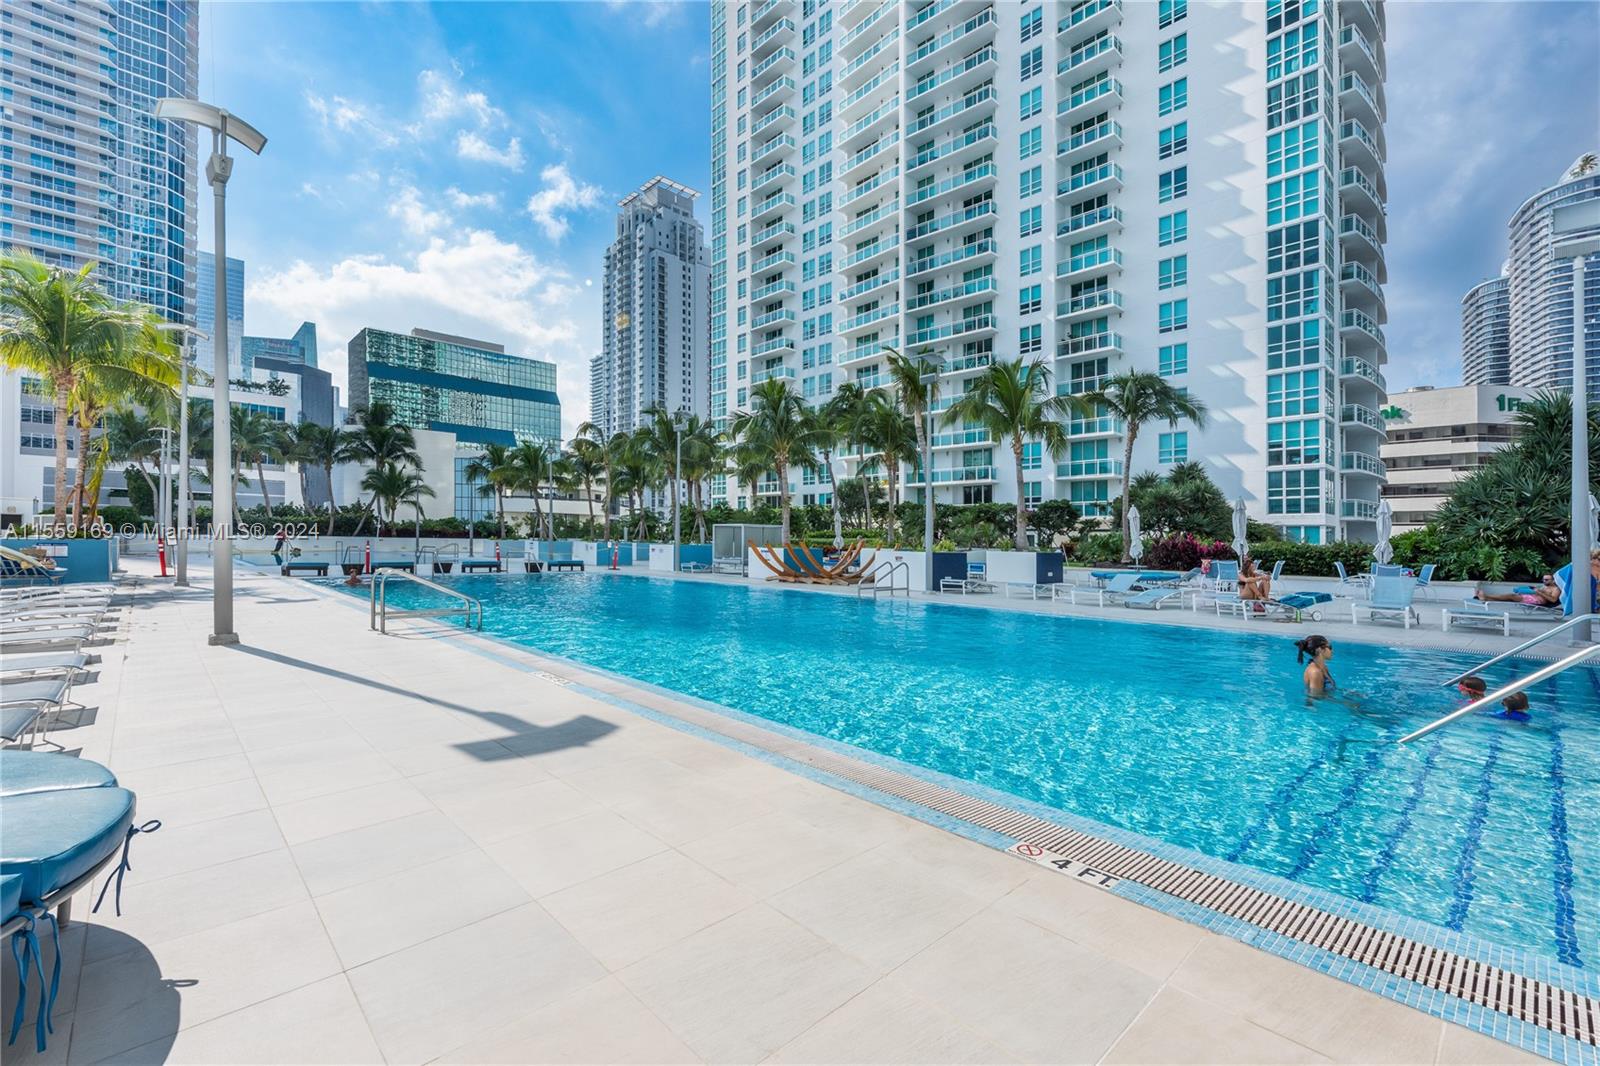 Gorgeous and spacious 1 BED / 1 BATH apartment in the heart of Brickell. Amazing layout and full of light. Walk everywhere! Top location. The Plaza has great amenities and a wonderful ambiance. New flooring was installed 2 years ago, wonderful city views towards Brickell avenue. Text listing agent. Available as from April 1st.